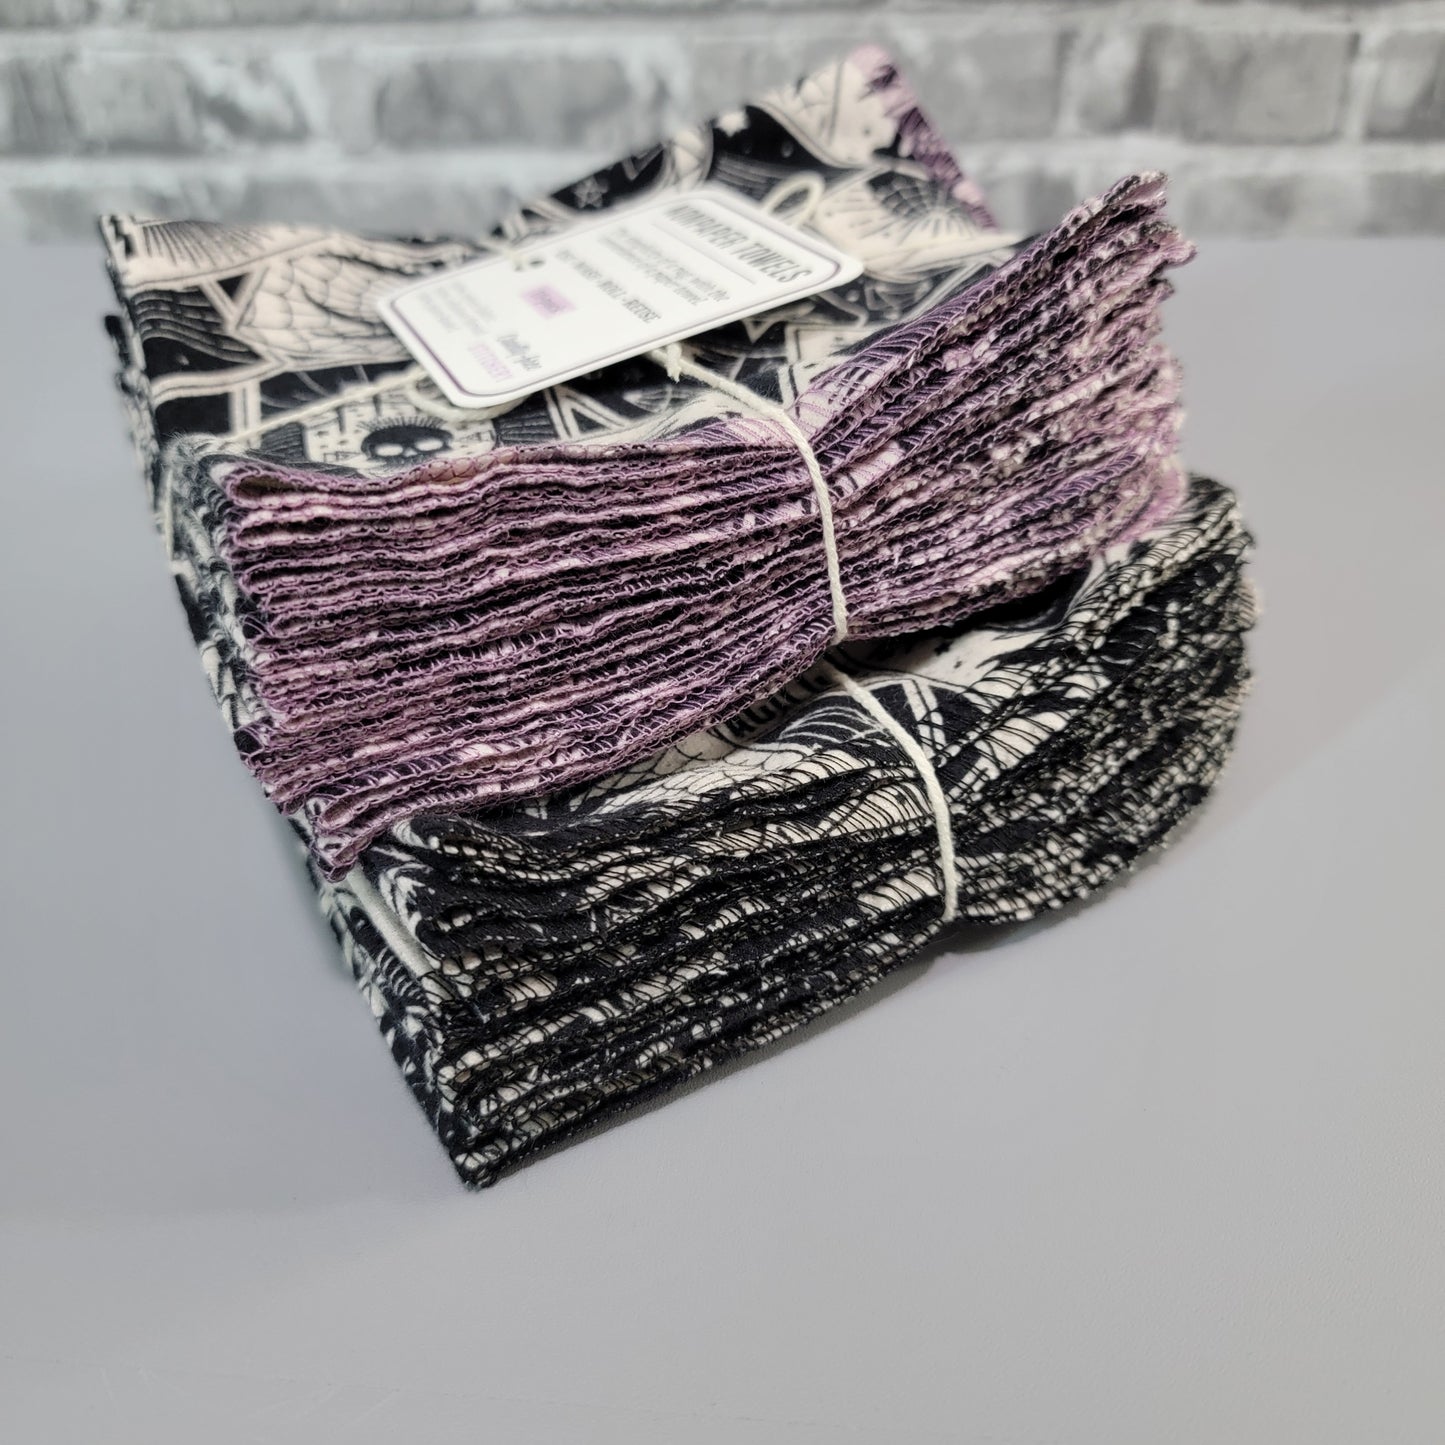 Two packs of the tarot cards NonPaper Towels stacked, one with the lilac purple stitching, and one with black stitching.